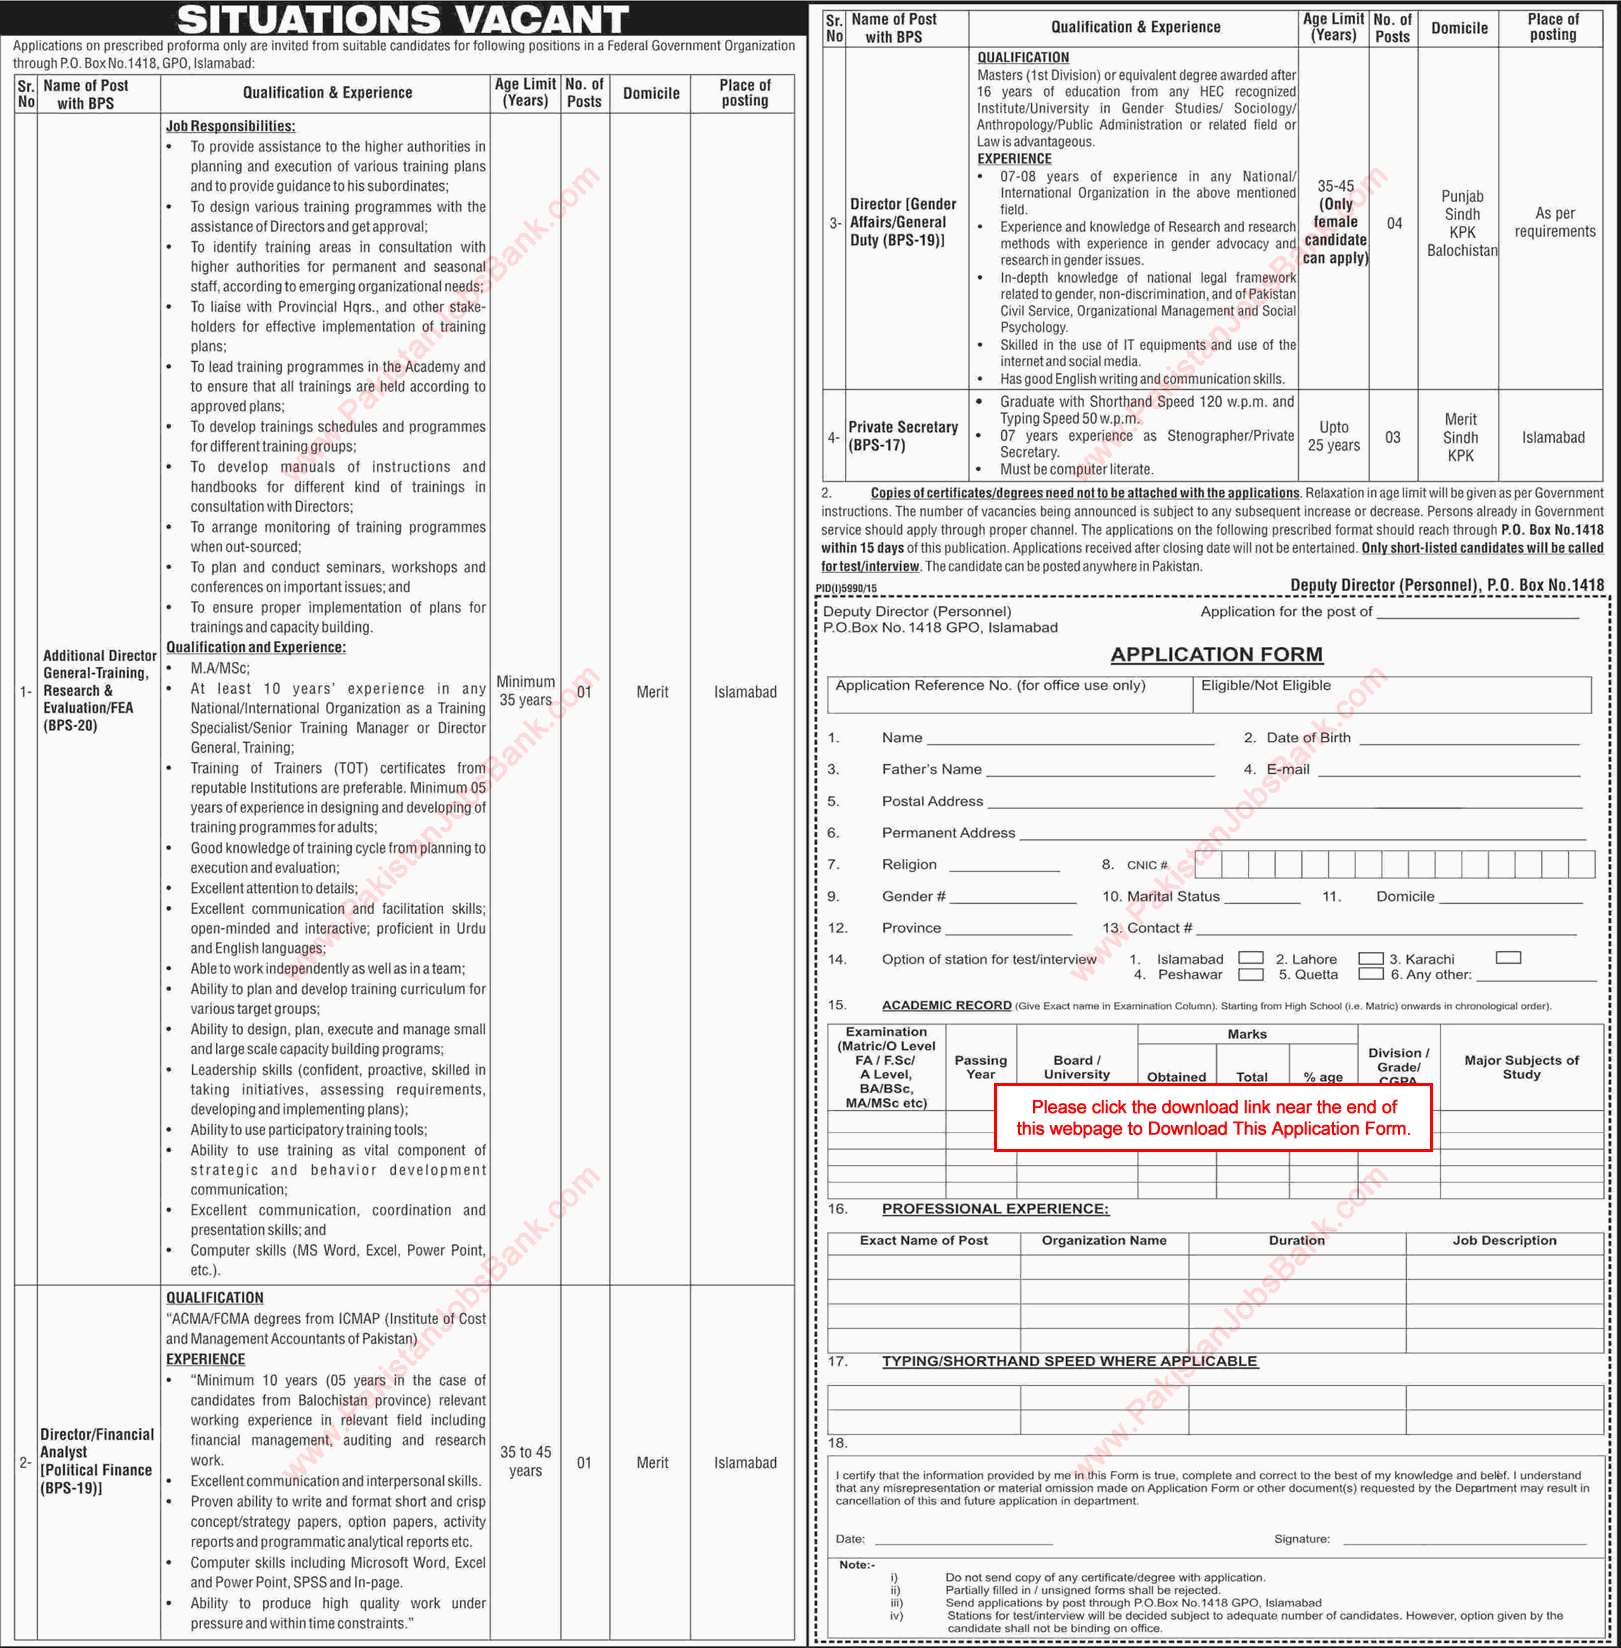 PO Box 1418 GPO Islamabad Jobs May 2016 Application Form Election Commission of Pakistan Latest / New